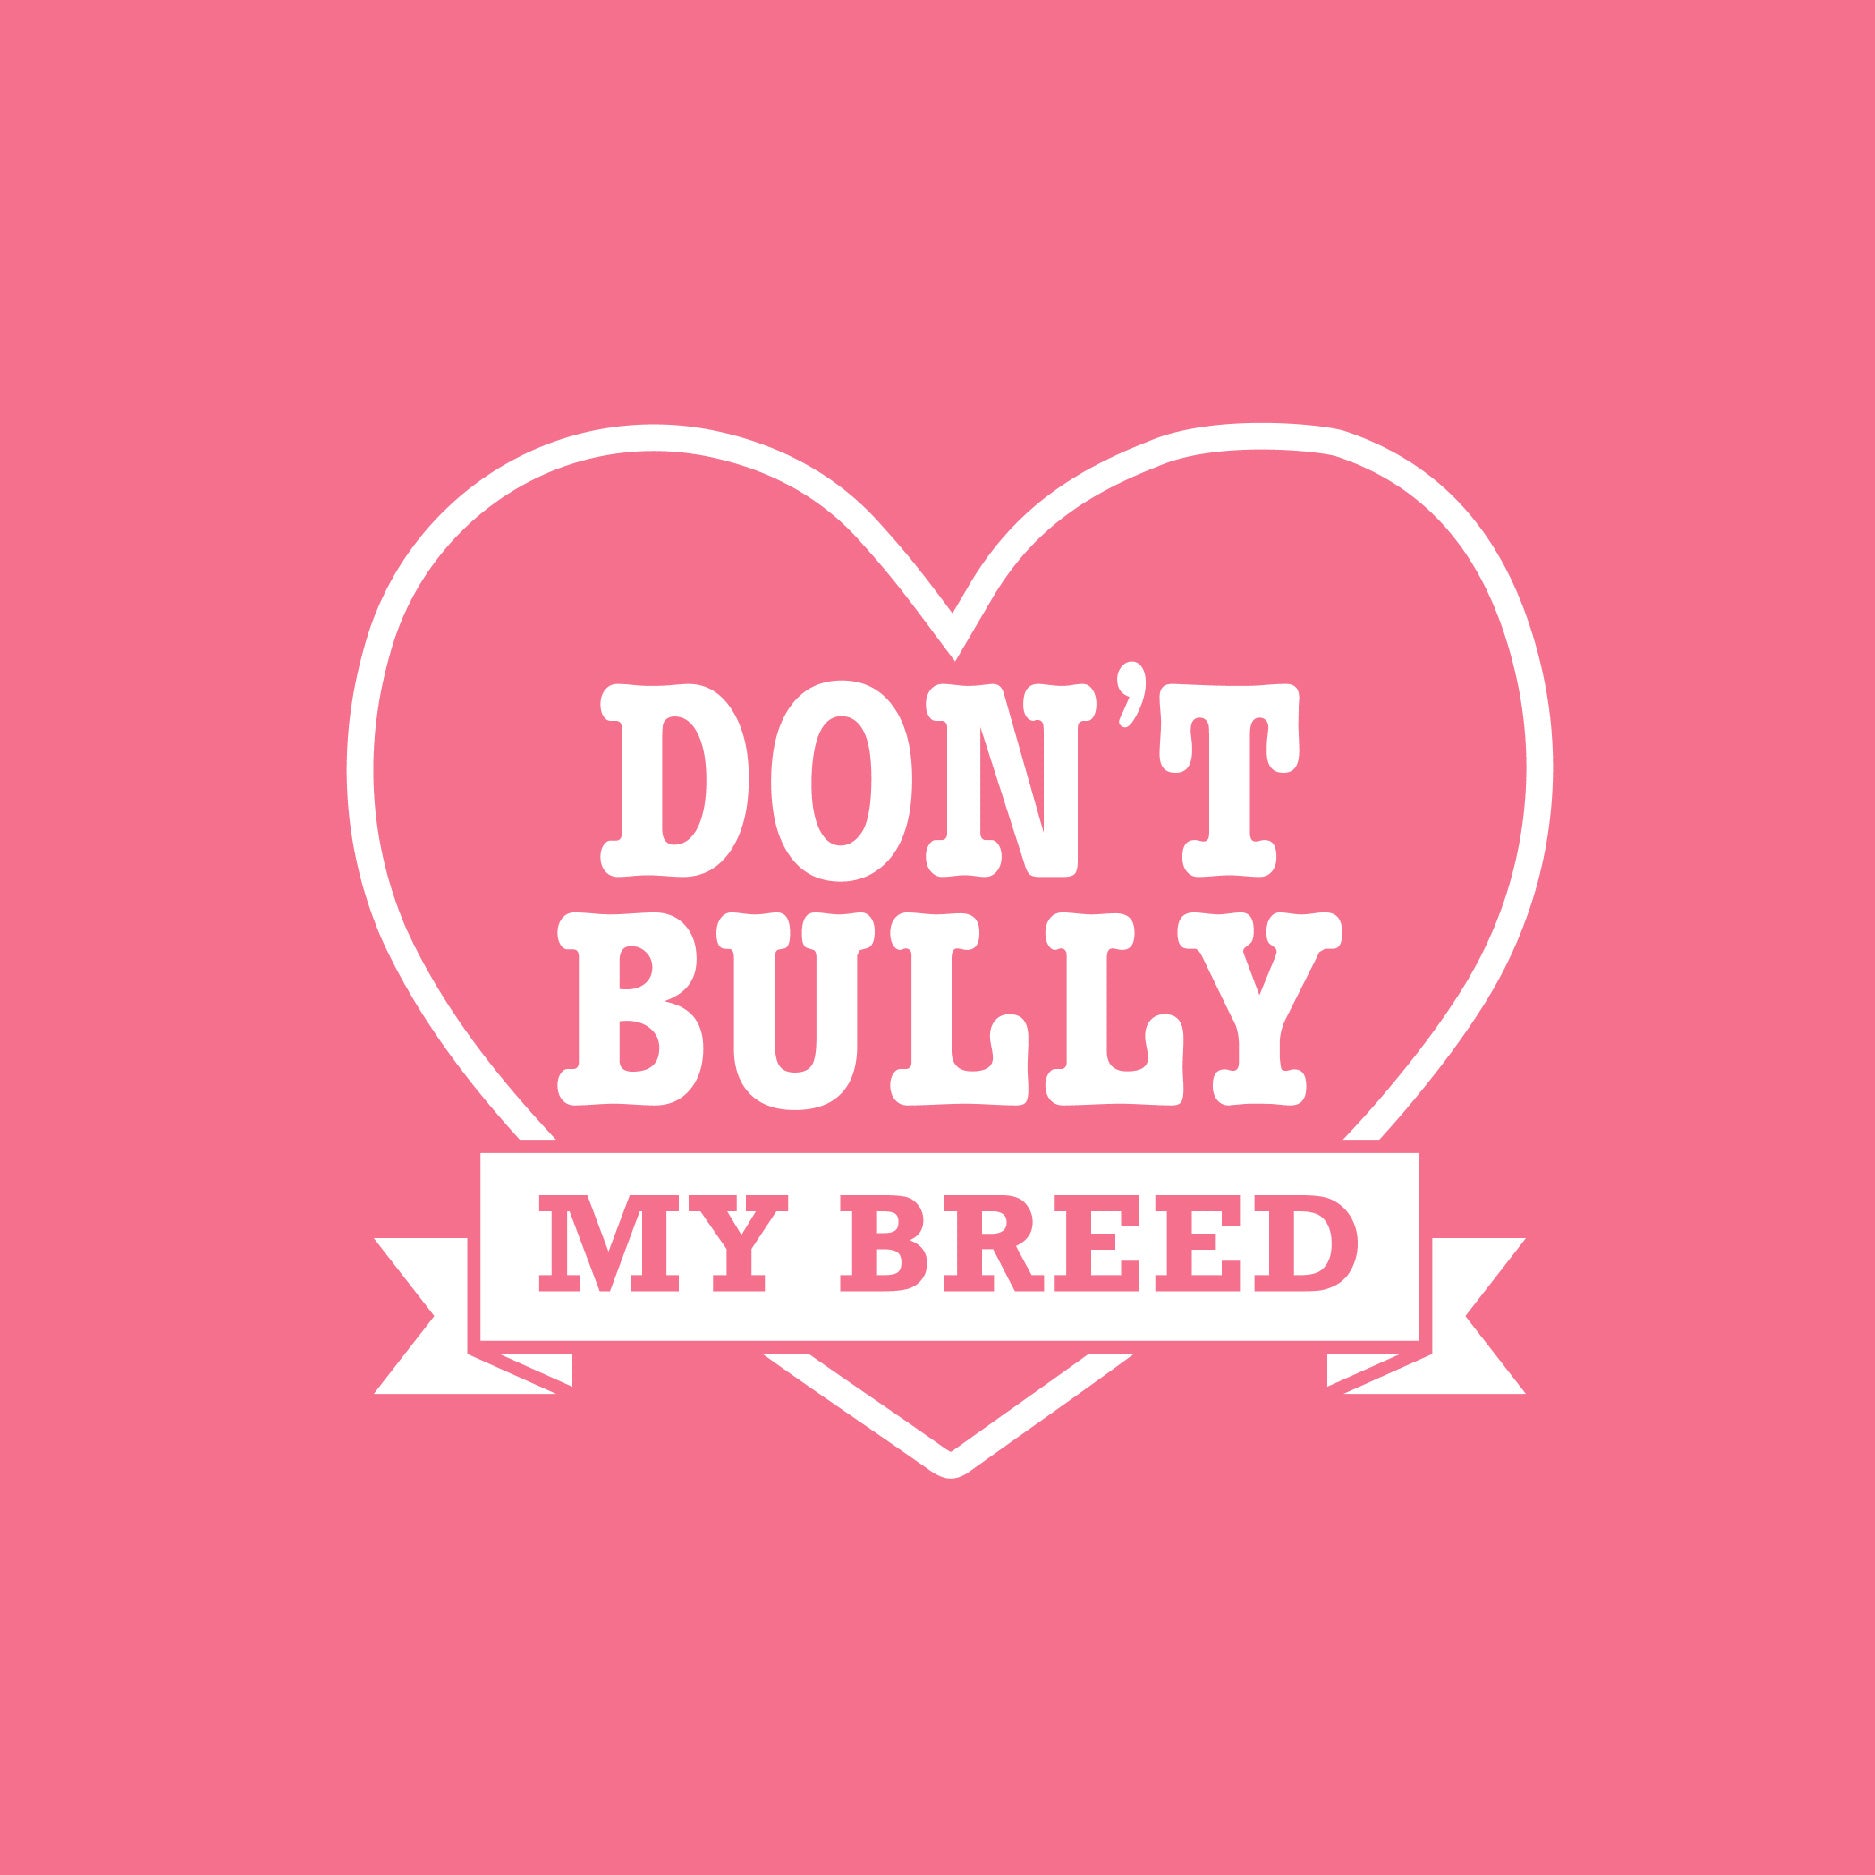 Don't Bully My Breed – Royal Collections And Co.